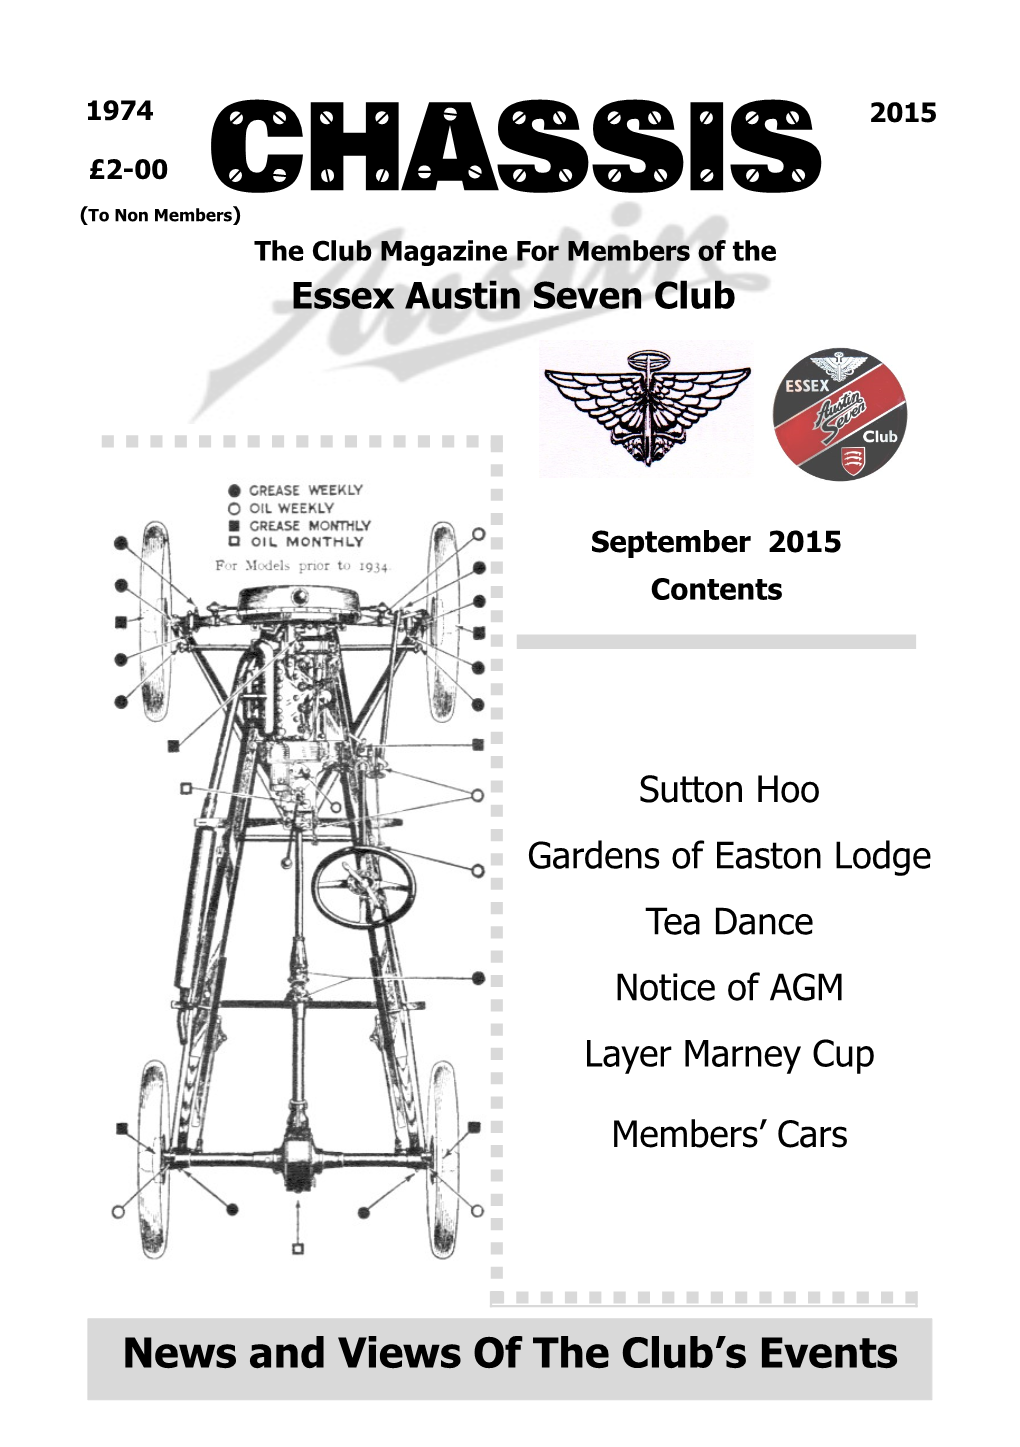 CHASSIS (To Non Members) the Club Magazine for Members of The